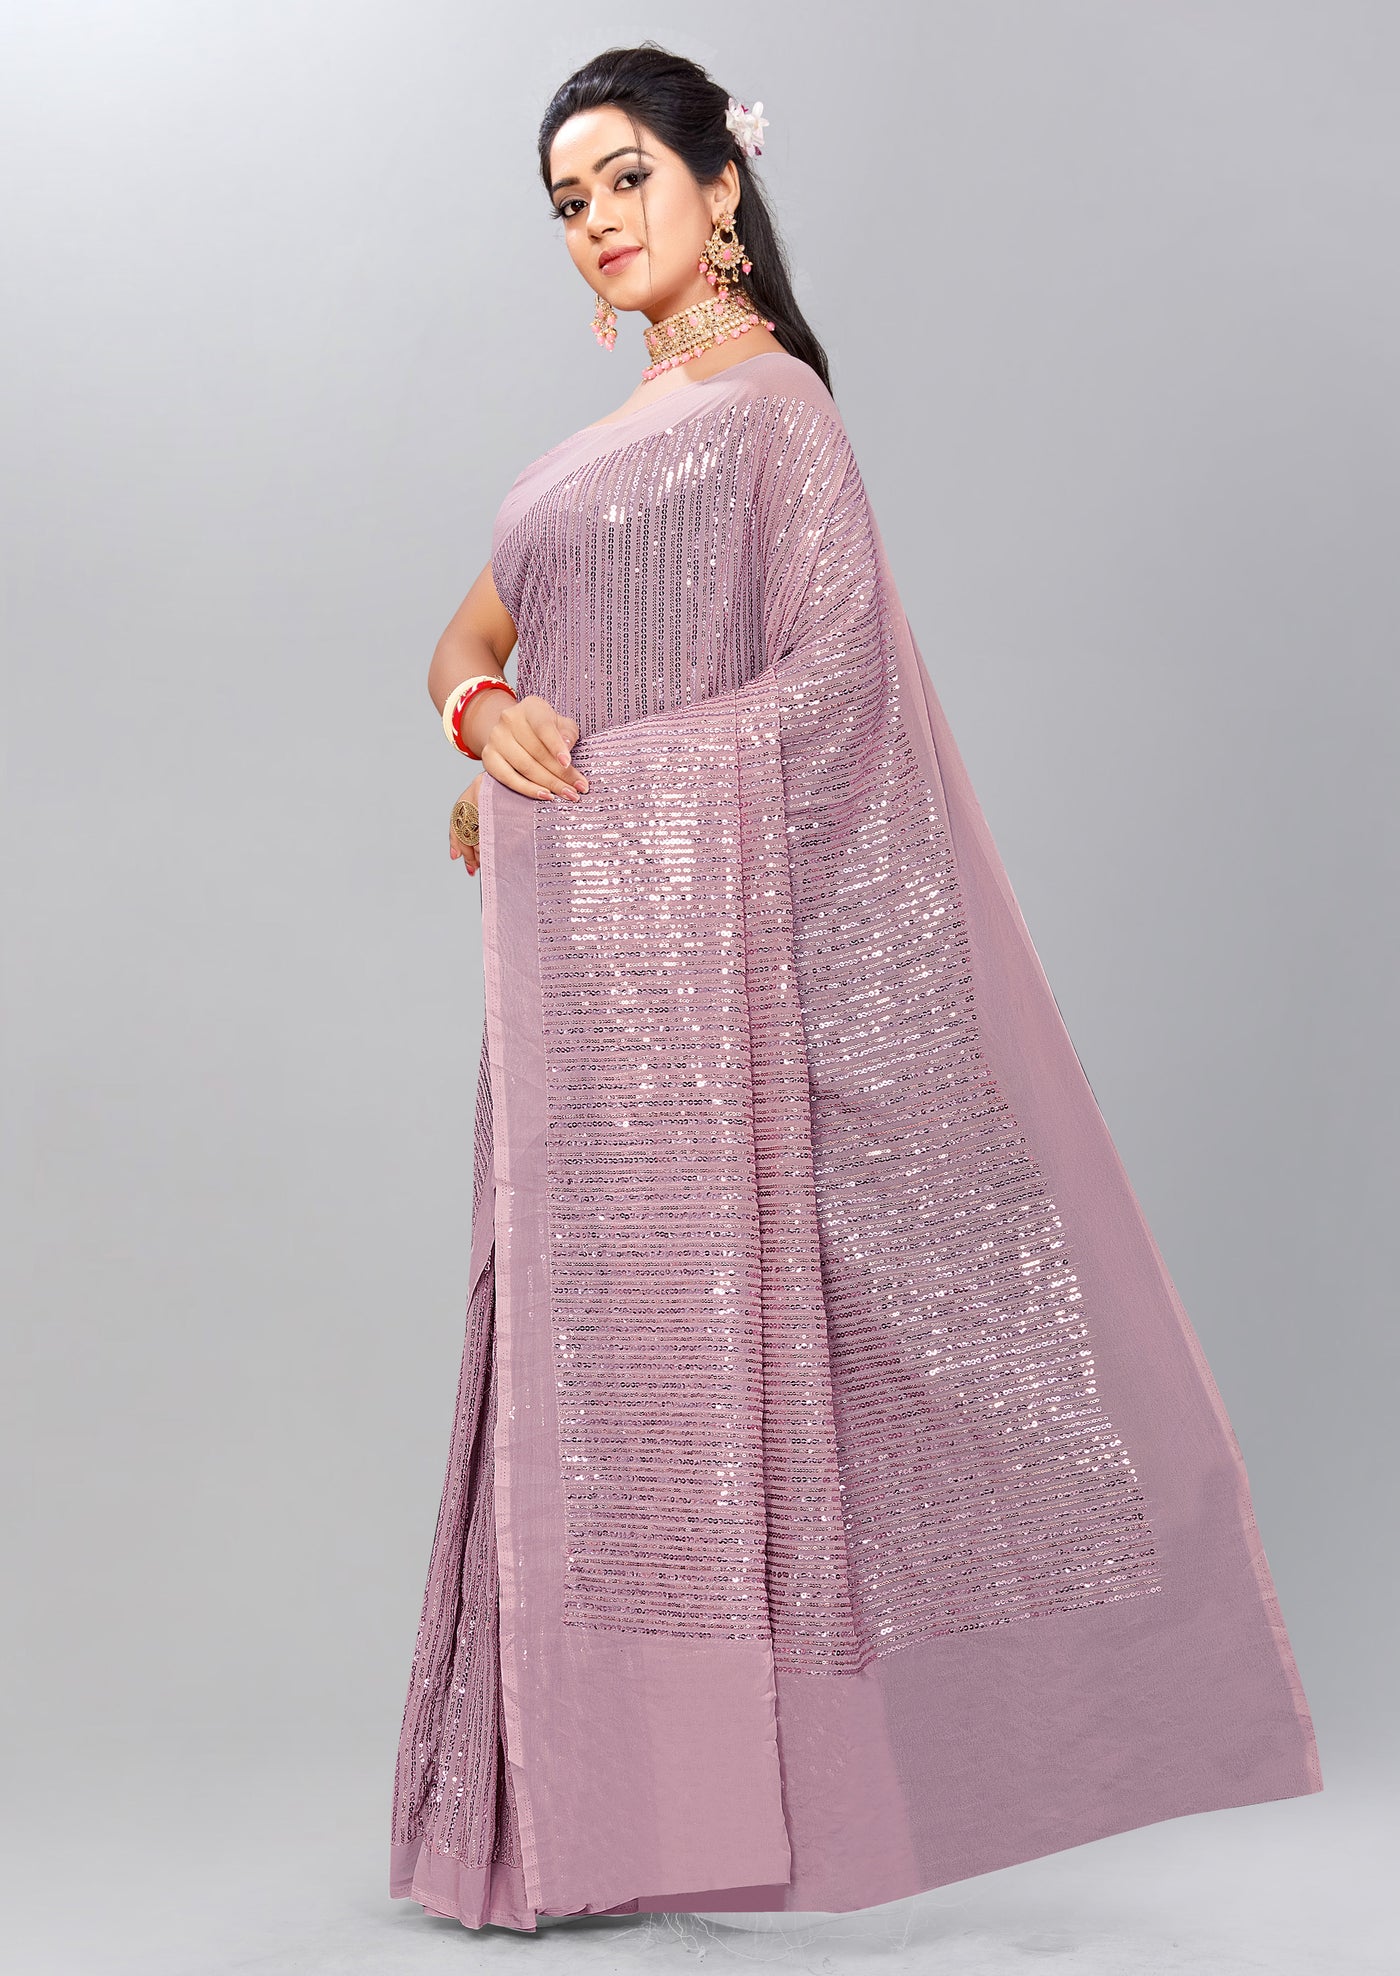 Lavender Shimmer Saree - Indian Clothing in Denver, CO, Aurora, CO, Boulder, CO, Fort Collins, CO, Colorado Springs, CO, Parker, CO, Highlands Ranch, CO, Cherry Creek, CO, Centennial, CO, and Longmont, CO. Nationwide shipping USA - India Fashion X